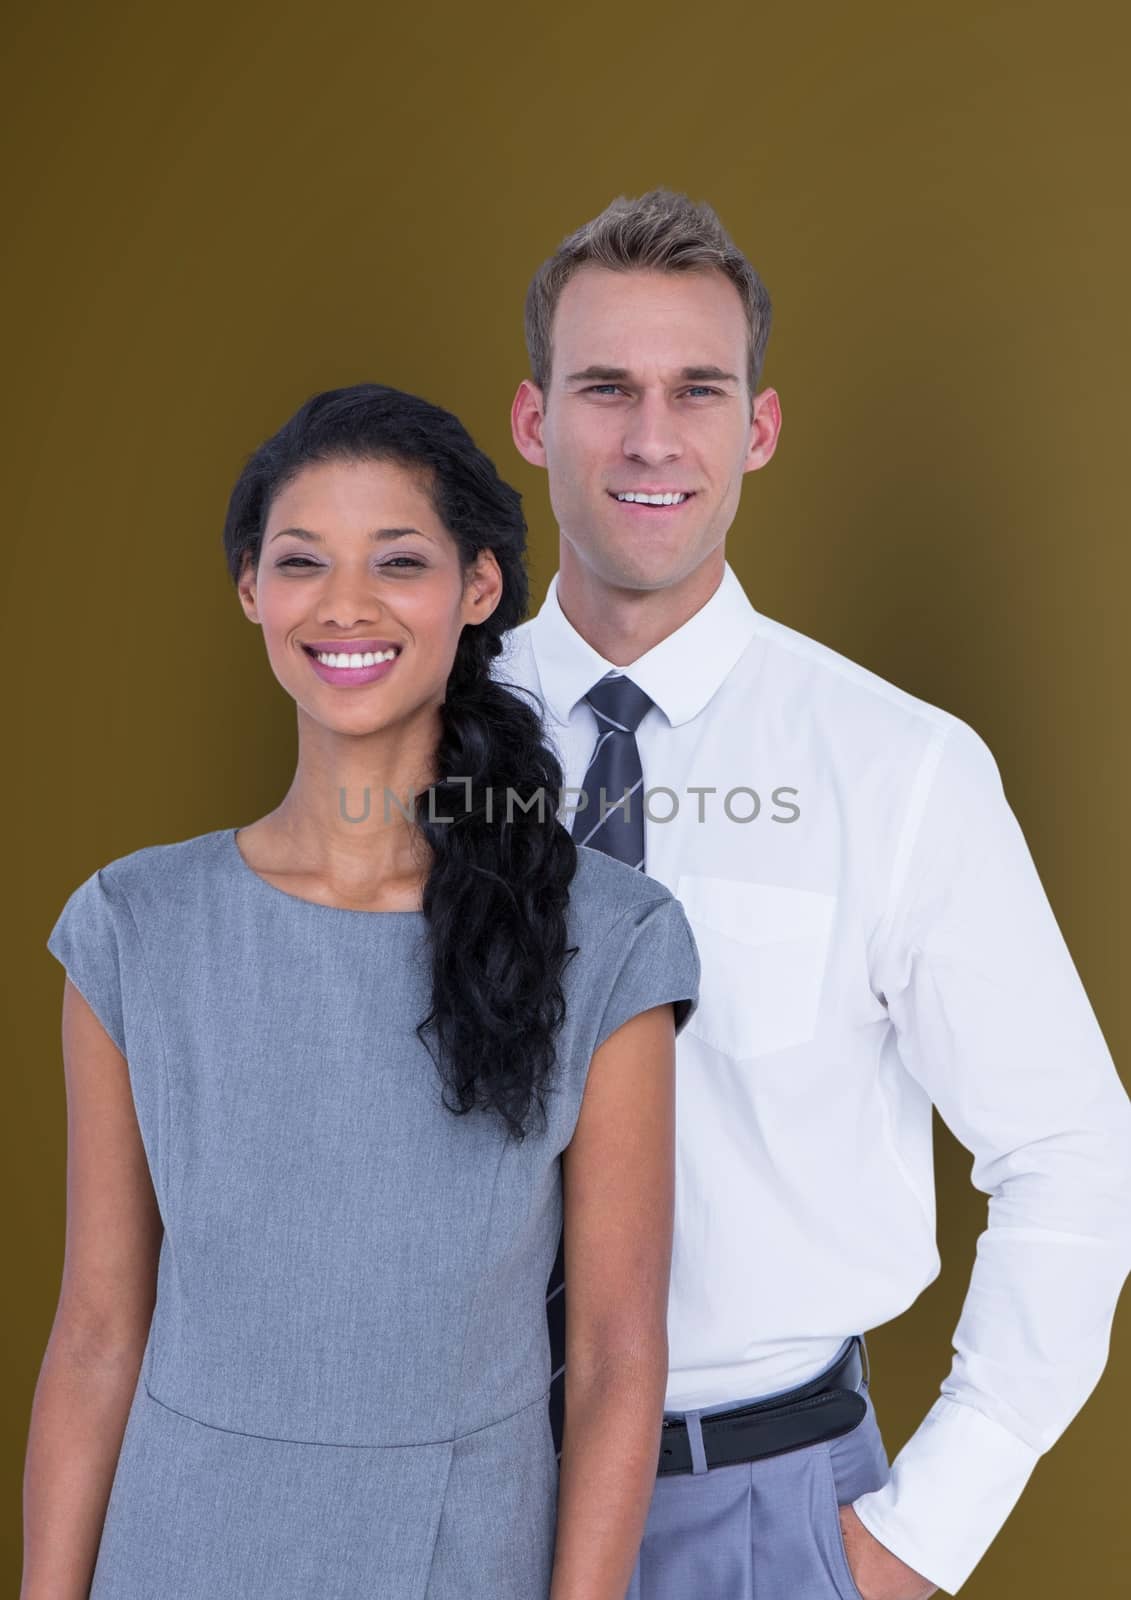 Confident business people smiling over colored background by Wavebreakmedia